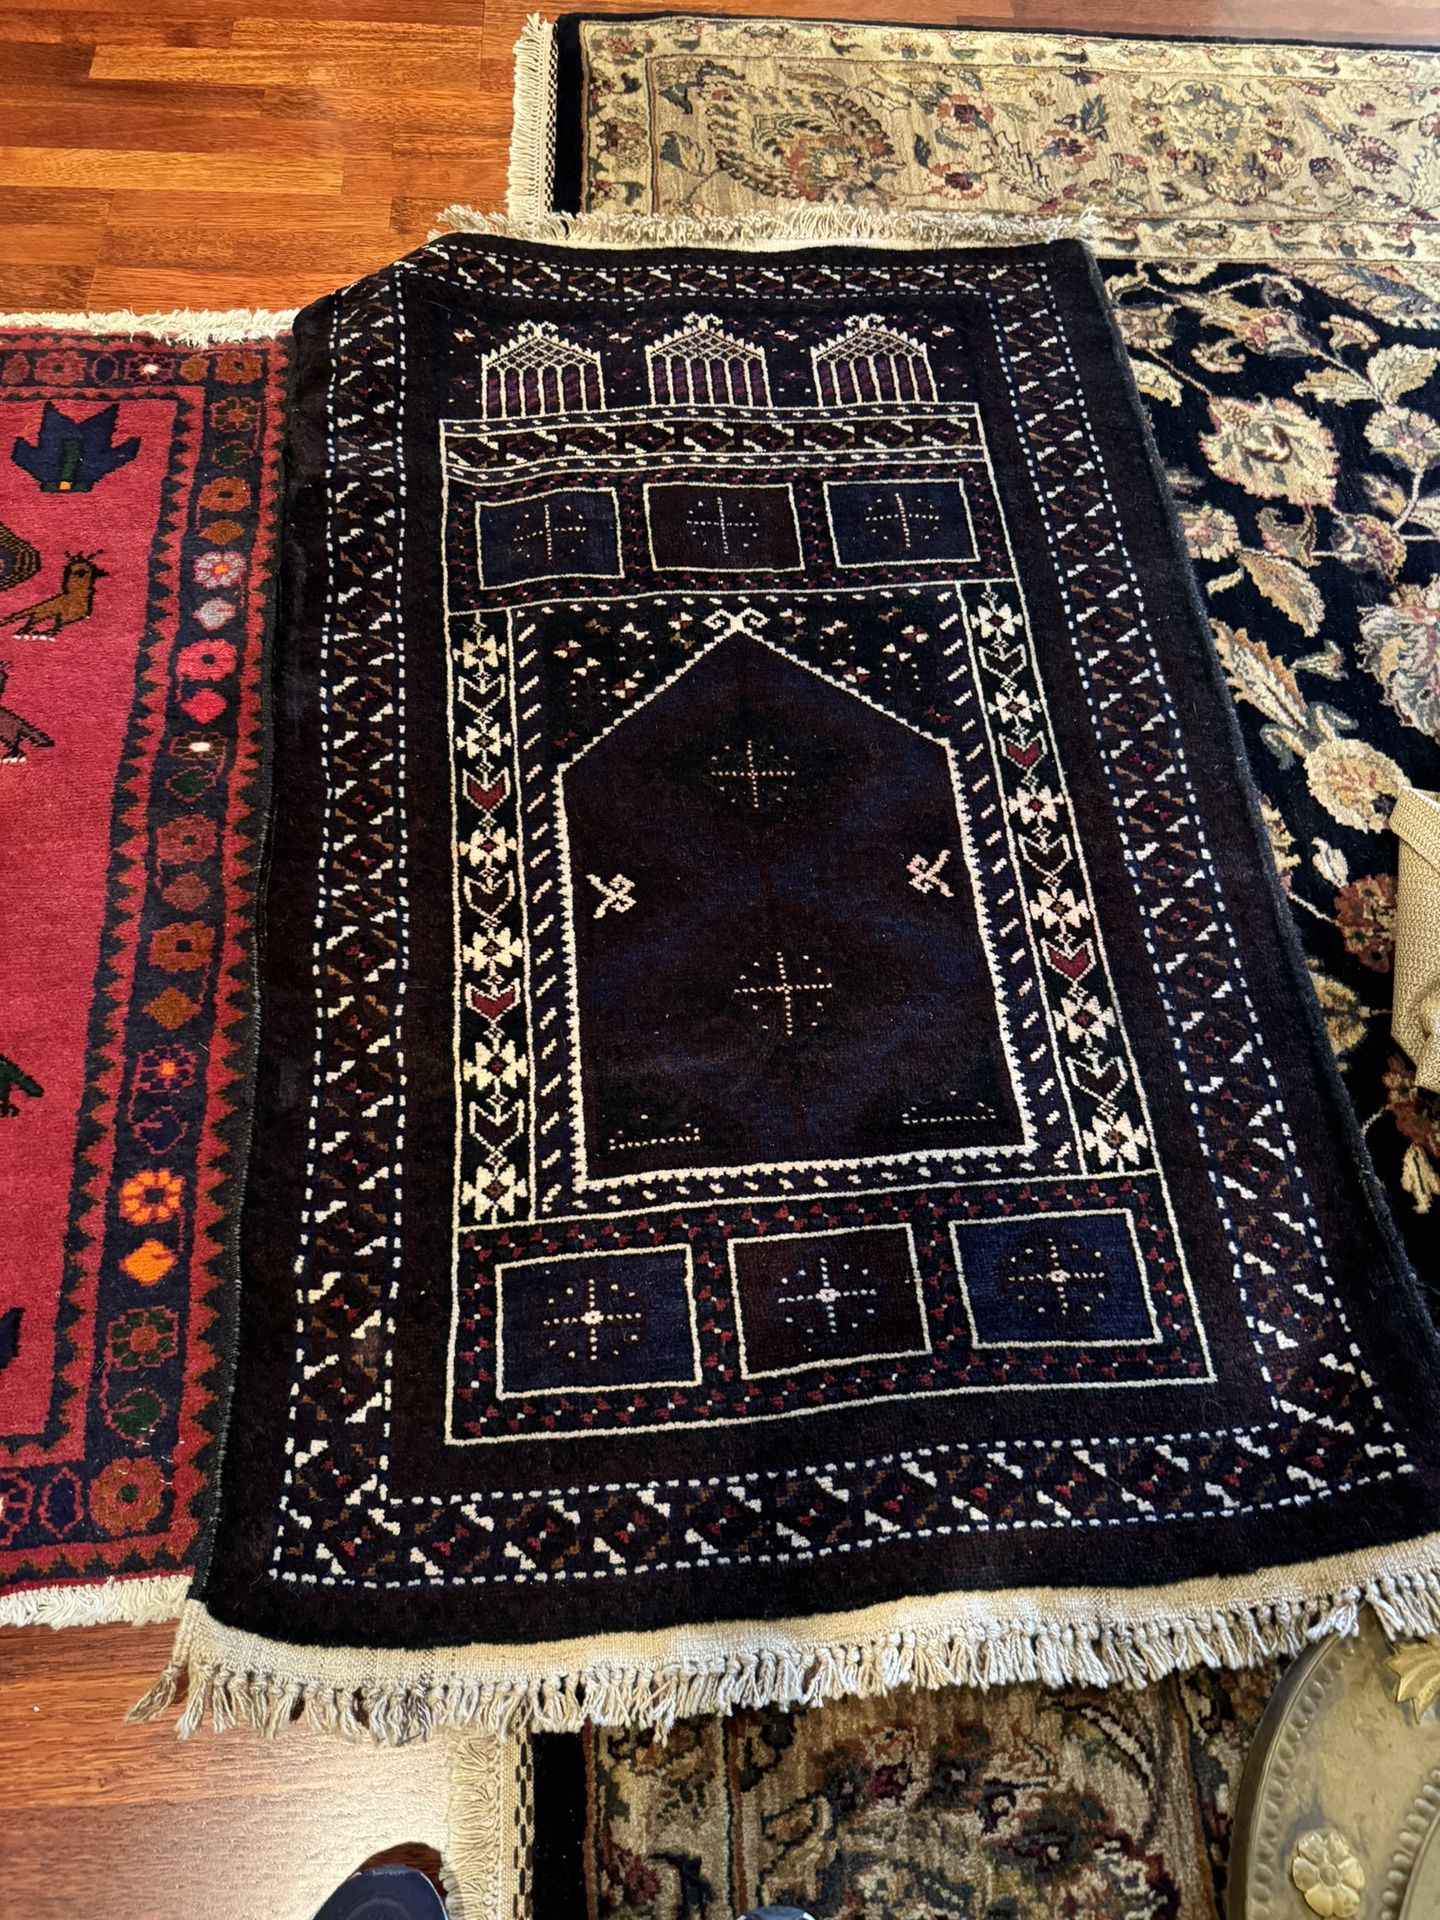 Two Small Persian Vintage Floor Mats - $125